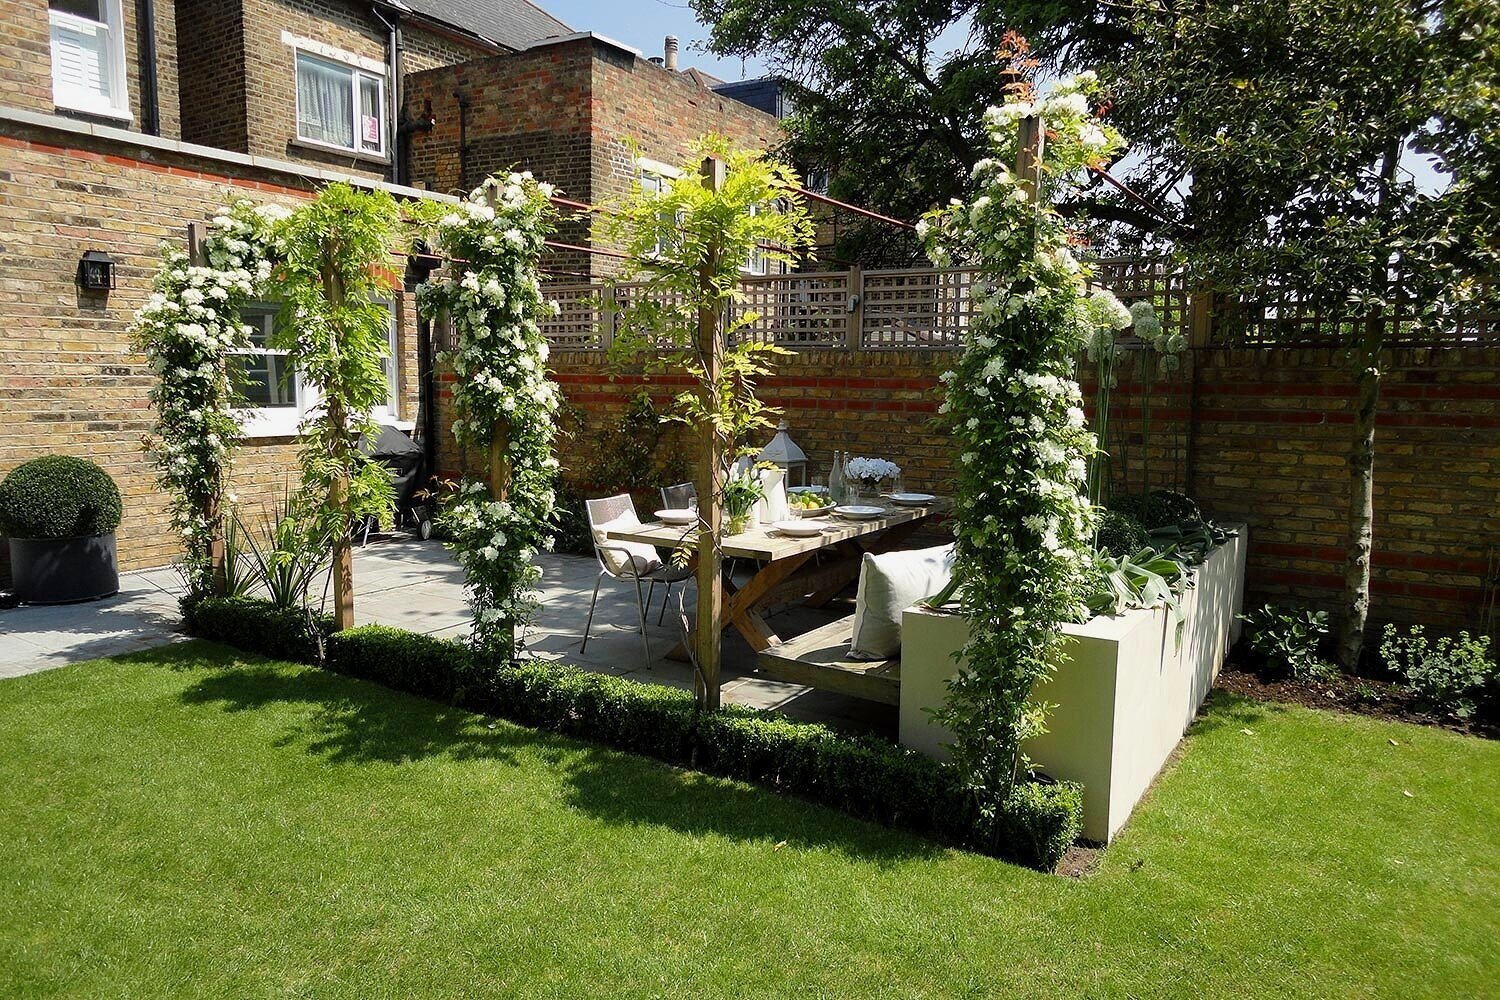  Garden Design &amp; Landscaping  Turning visions of outdoor living into reality   View Our Work  